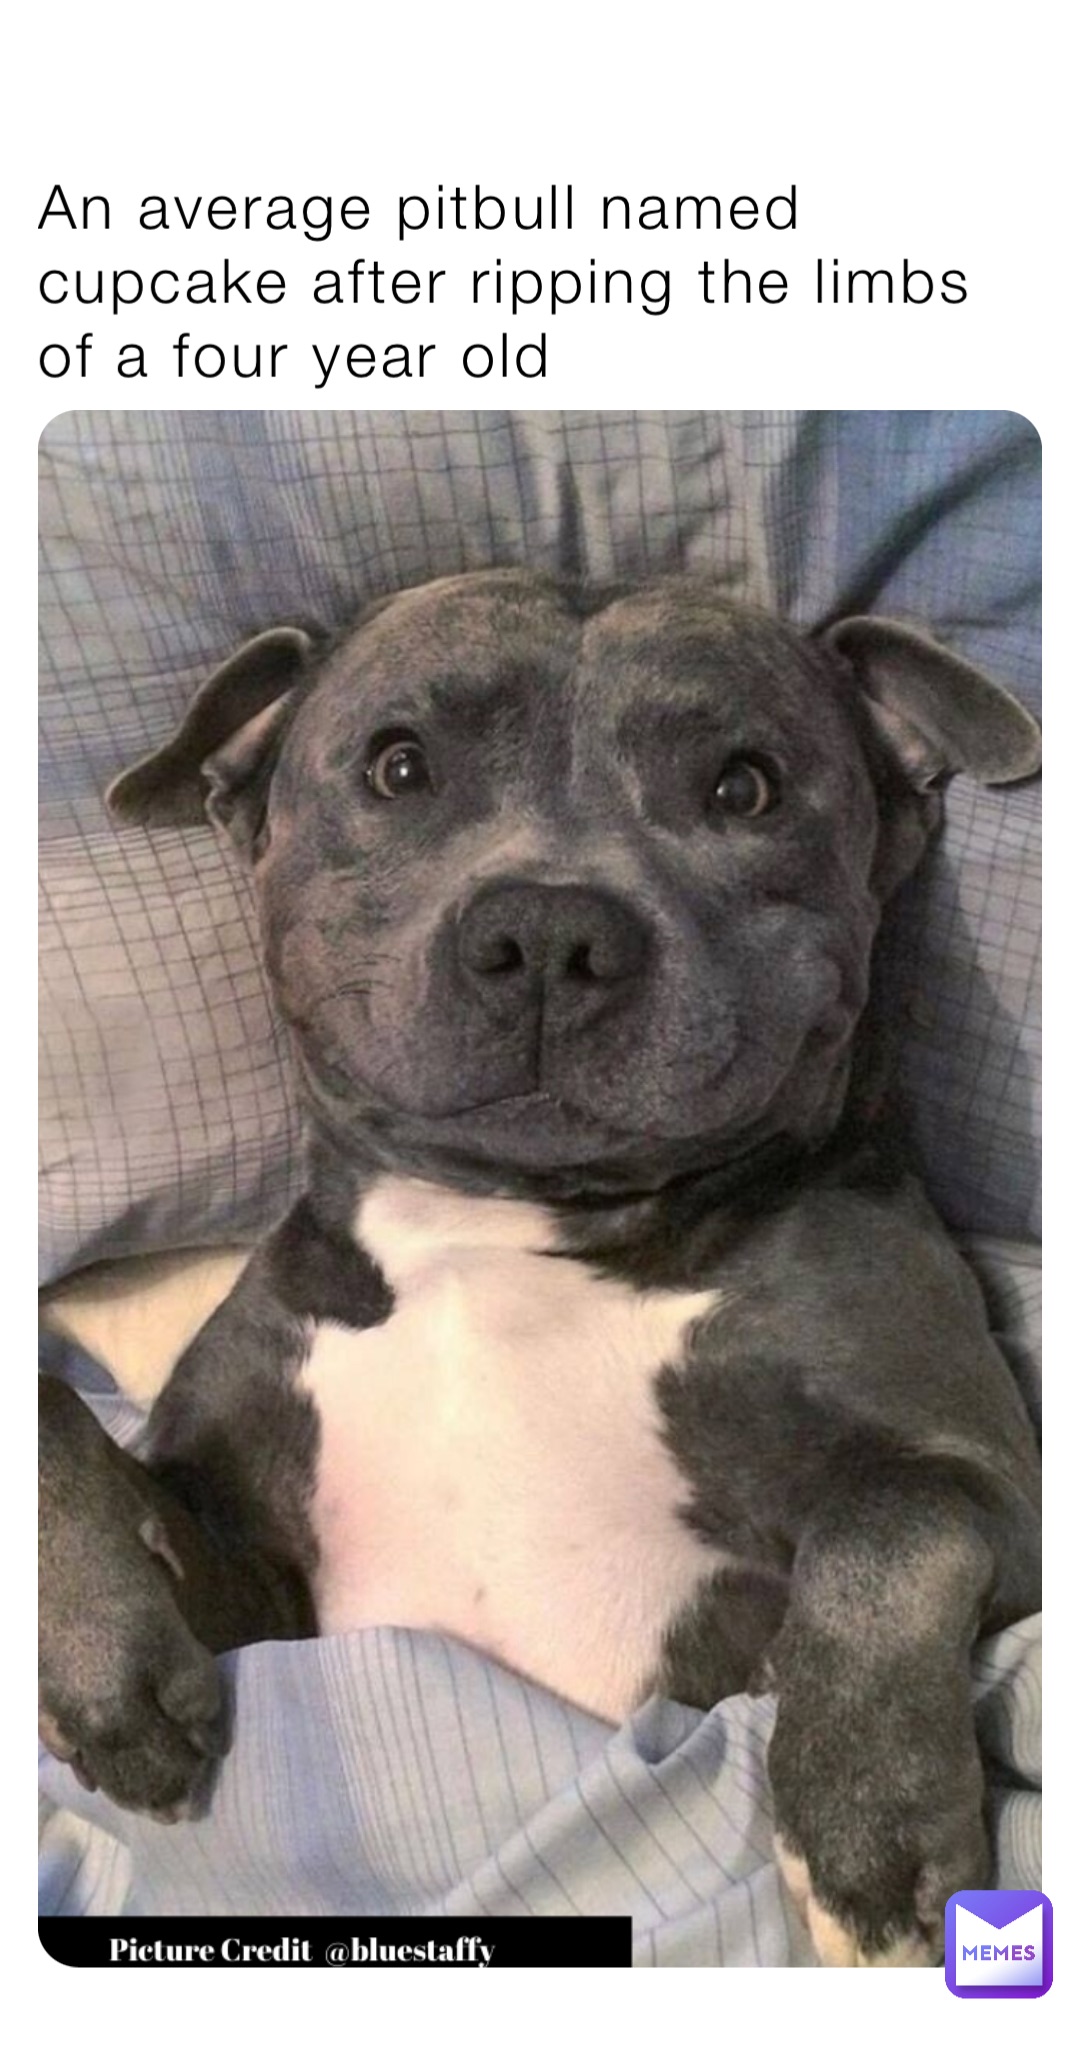 An average pitbull named cupcake after ripping the limbs of a four year old